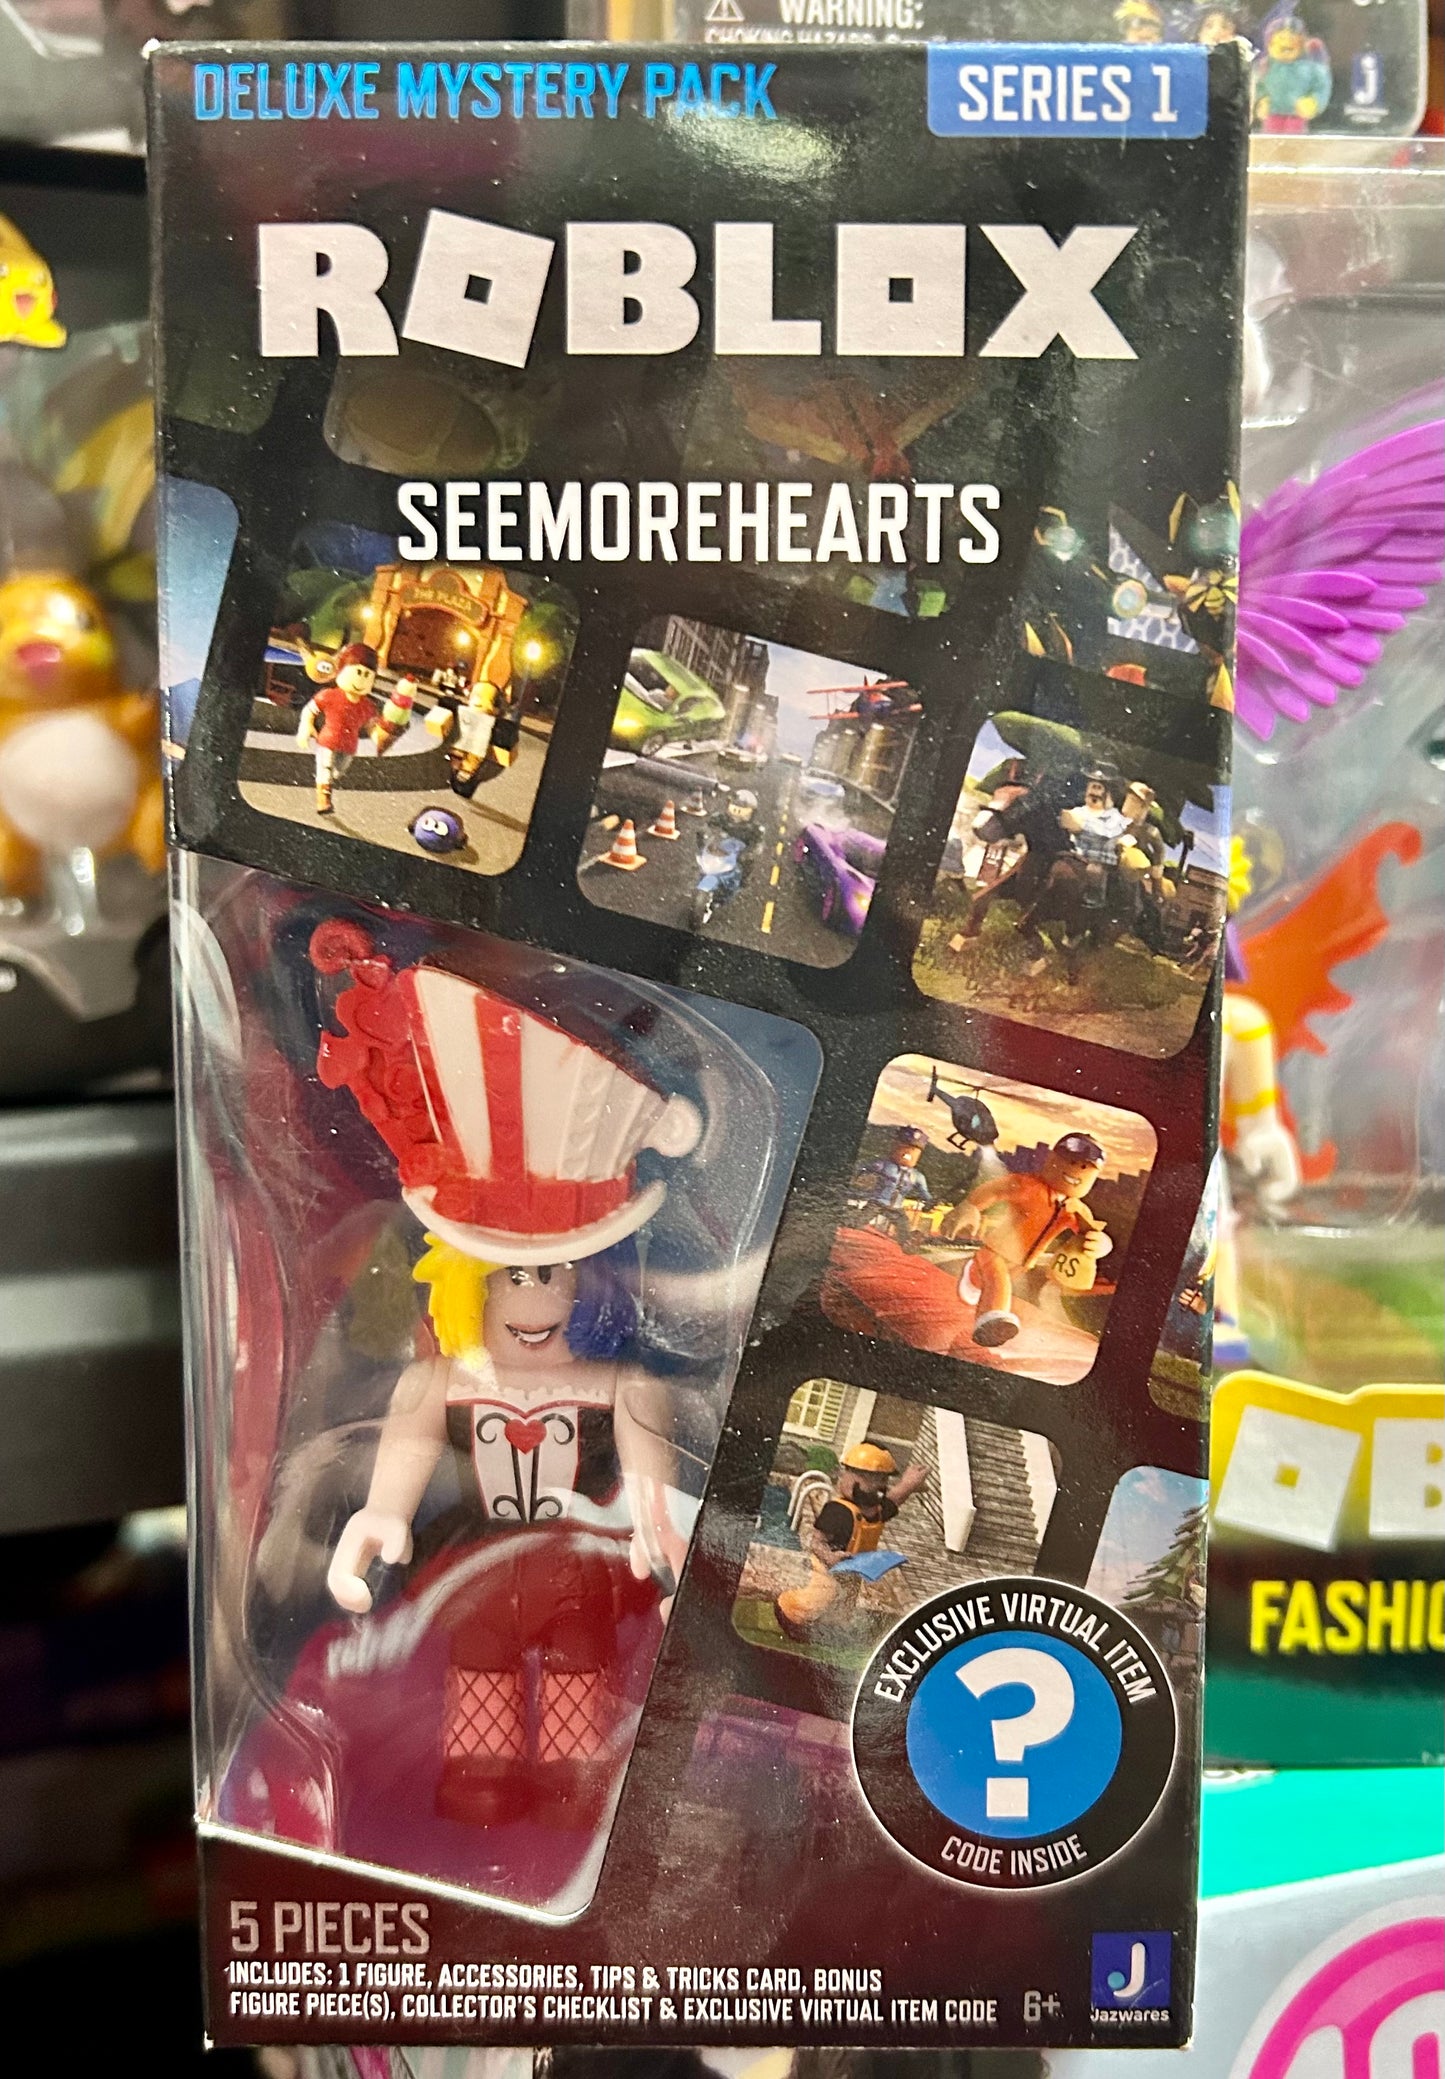 Roblox Series 1 Seemorehearts Deluxe Mystery Pack